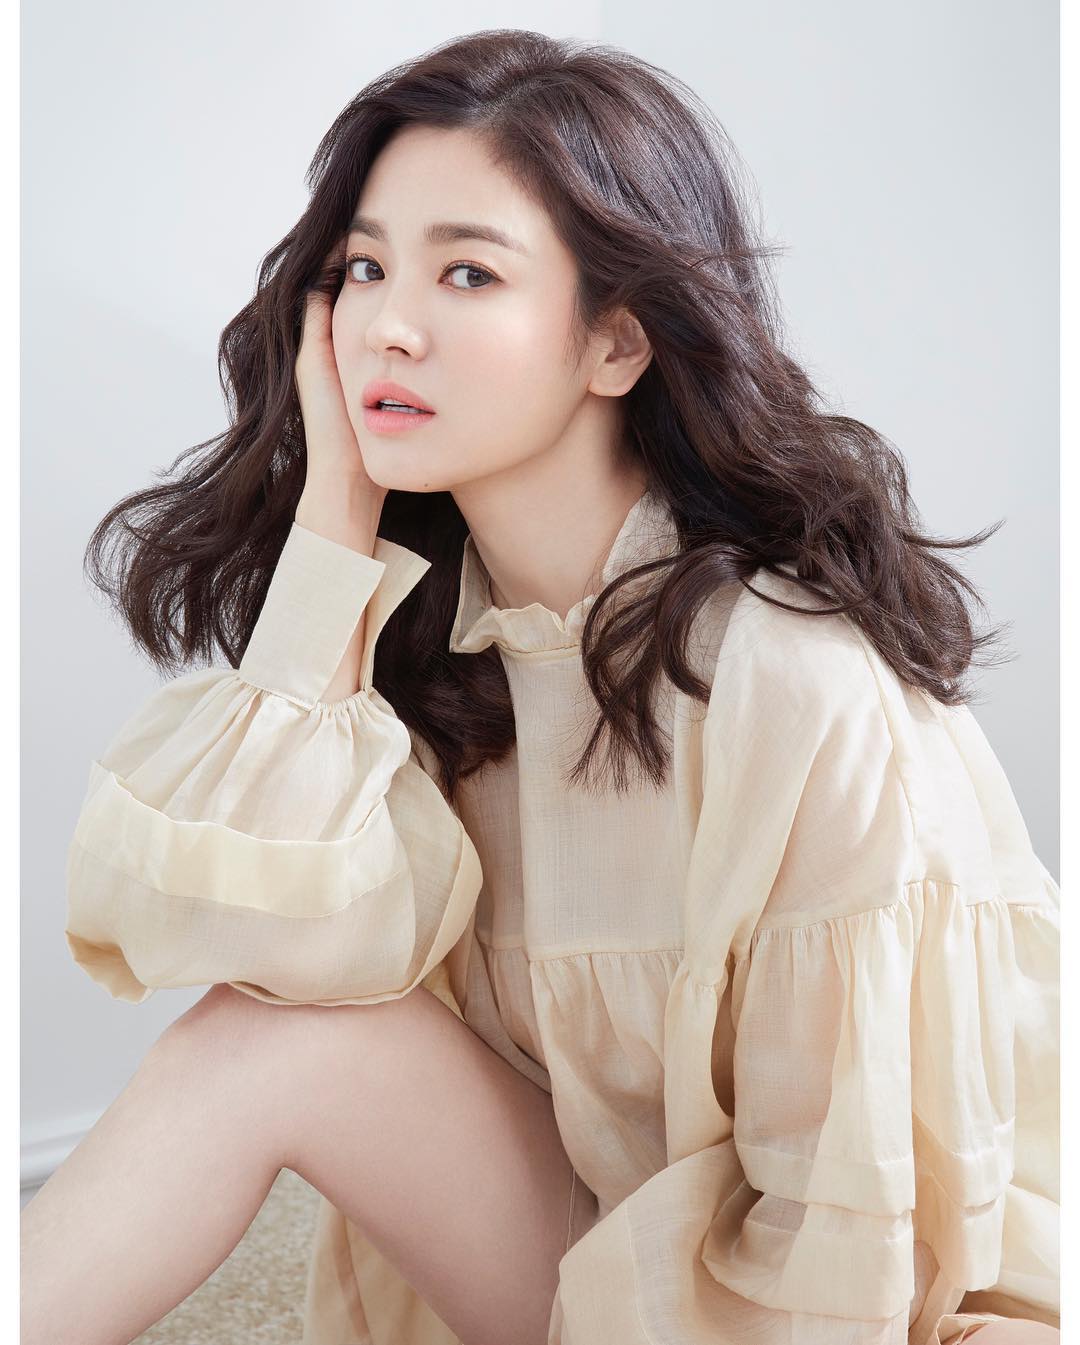 Song Hye Kyo Facts